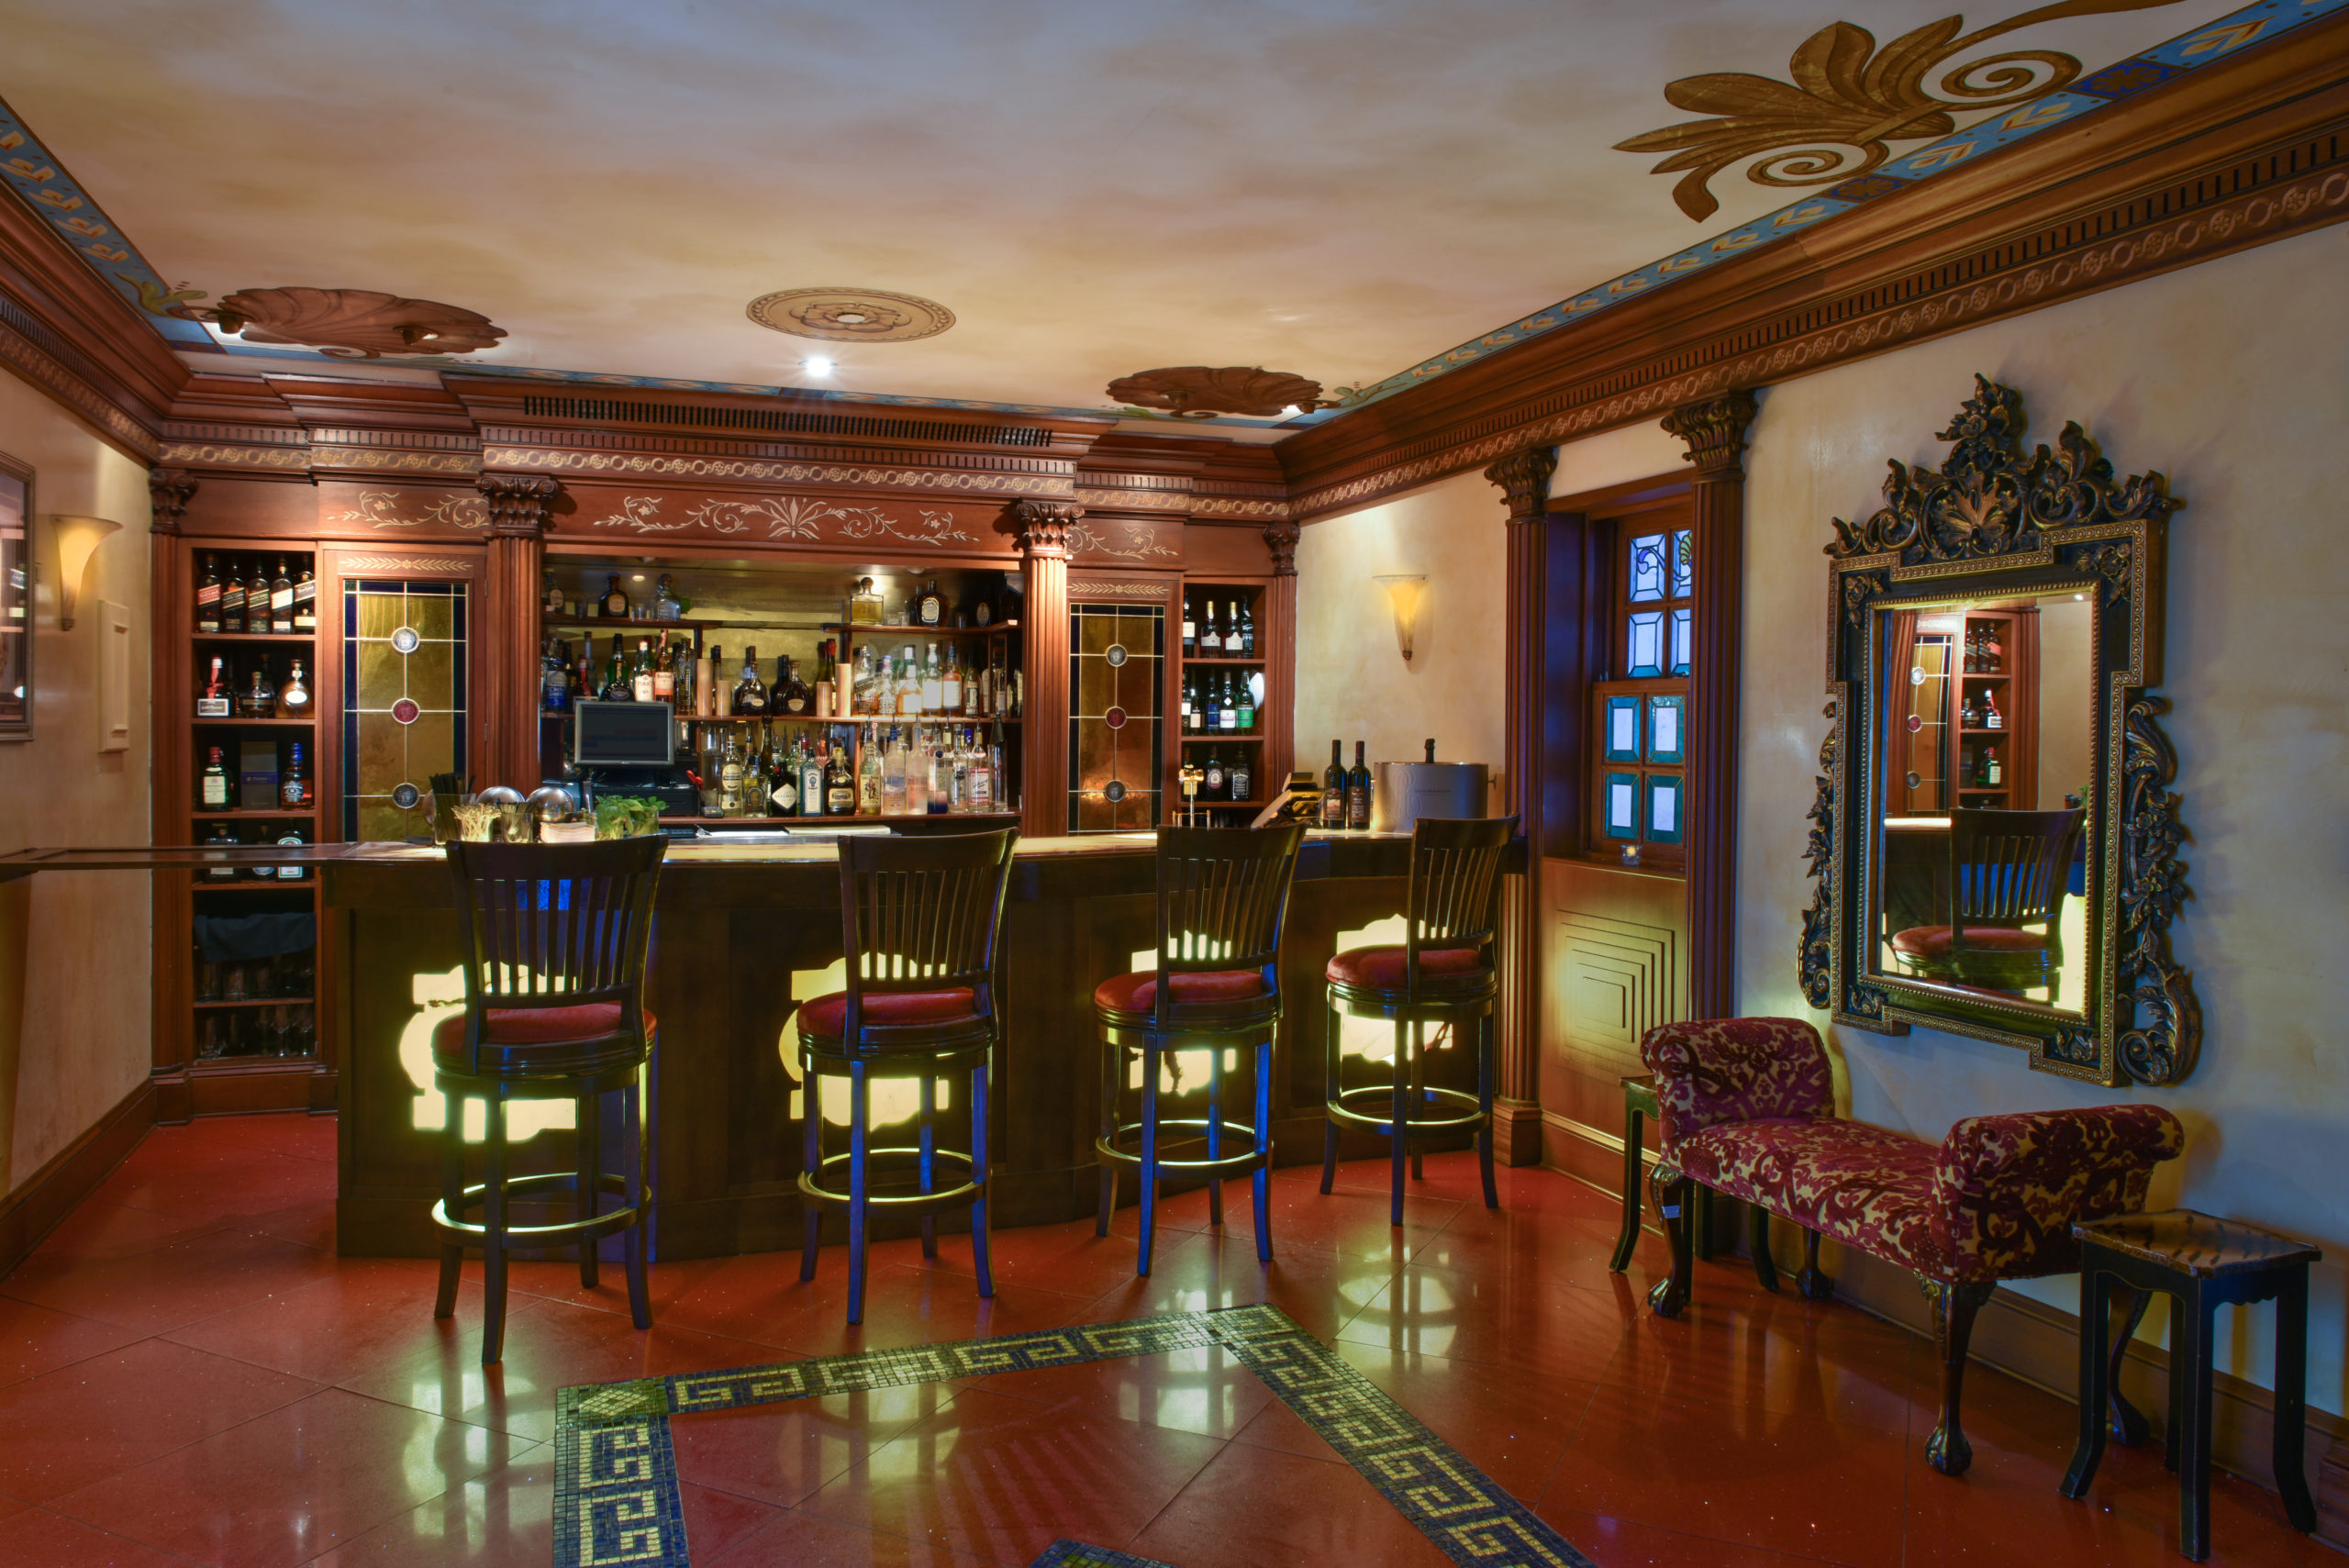 traditional bar area with 4 bar stools, wooden built ins and stained glass windows to the right